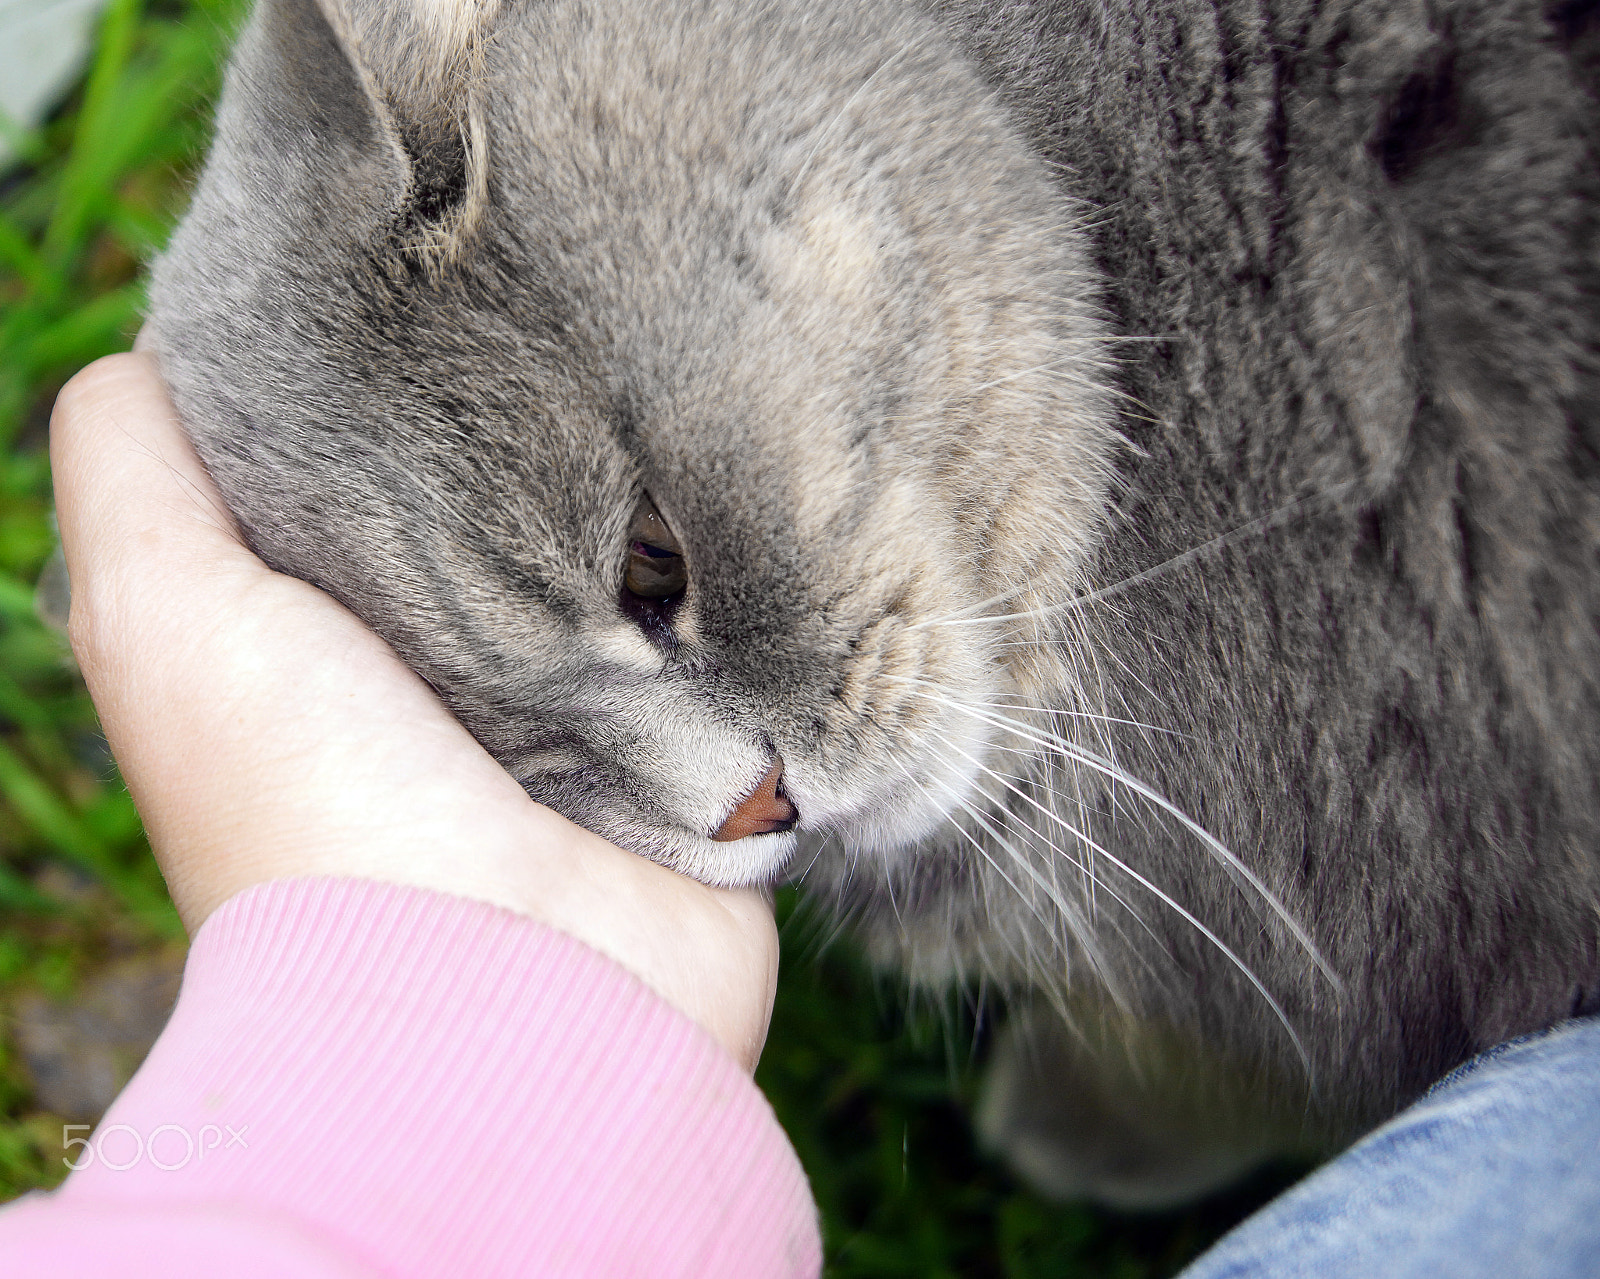 Sony SLT-A65 (SLT-A65V) sample photo. The gray cat rests against the hand, wants affection, the hand strokes the cat photography